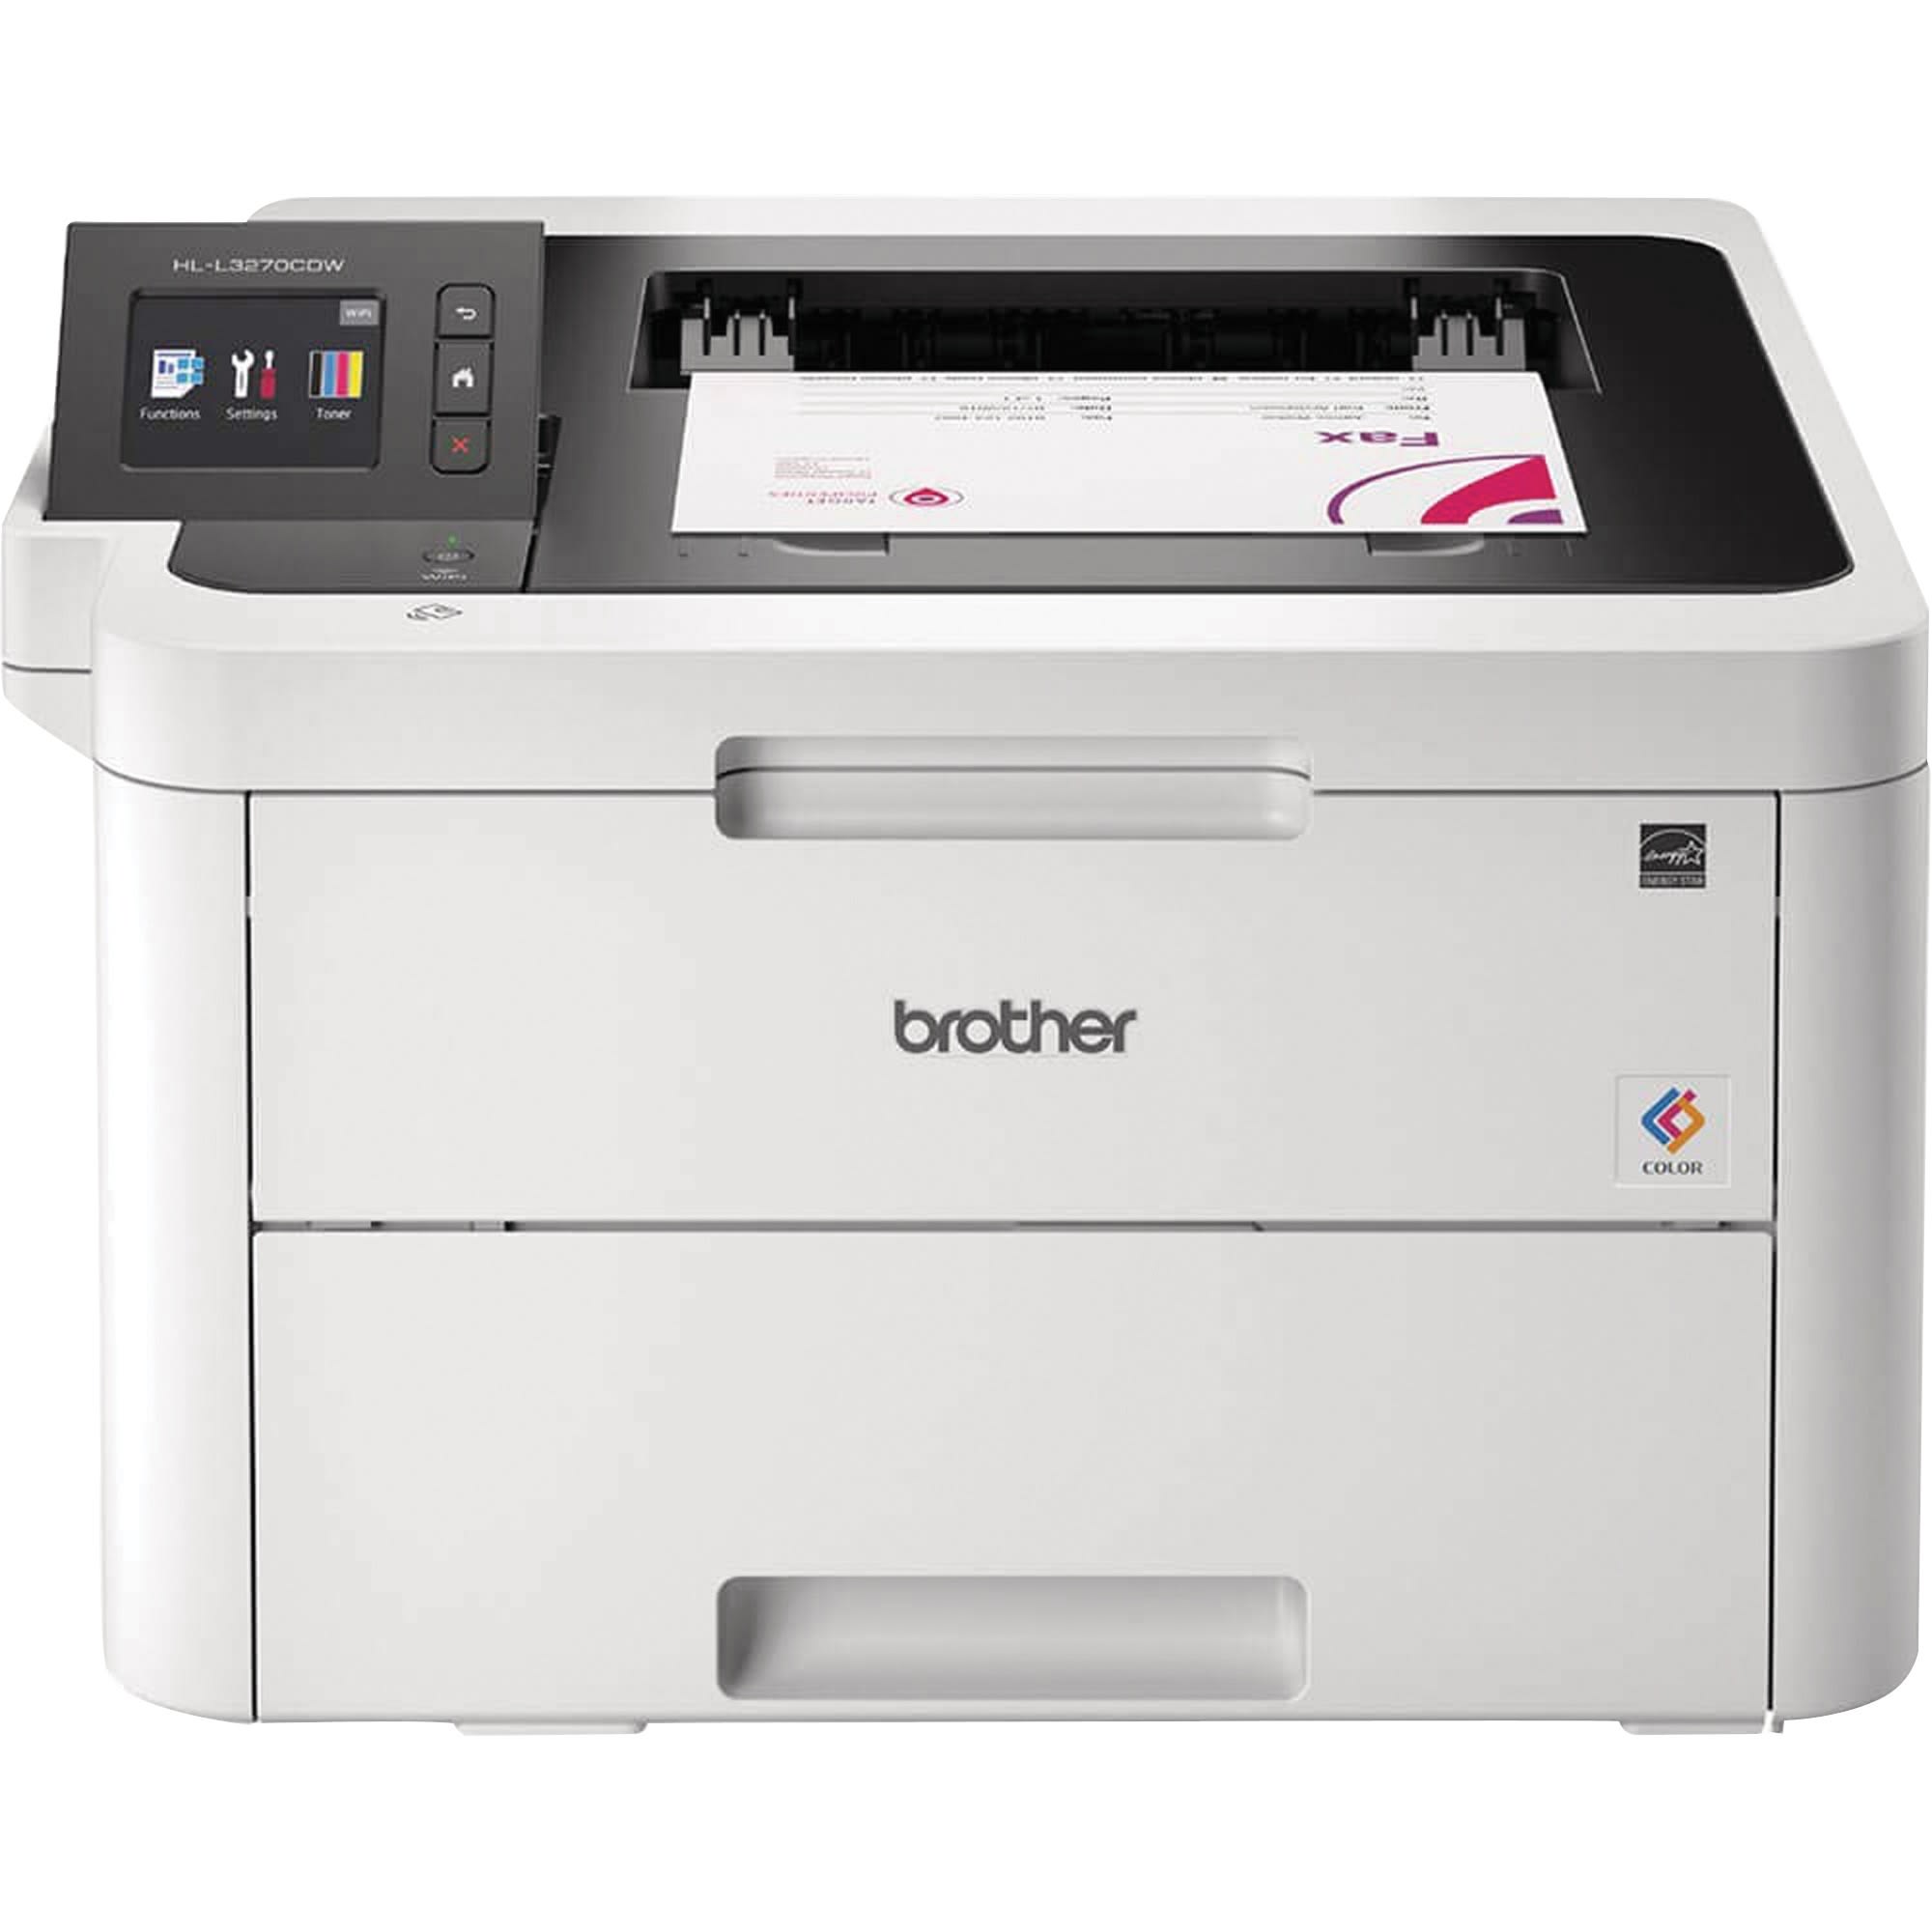 Brother Printers | Office Depot